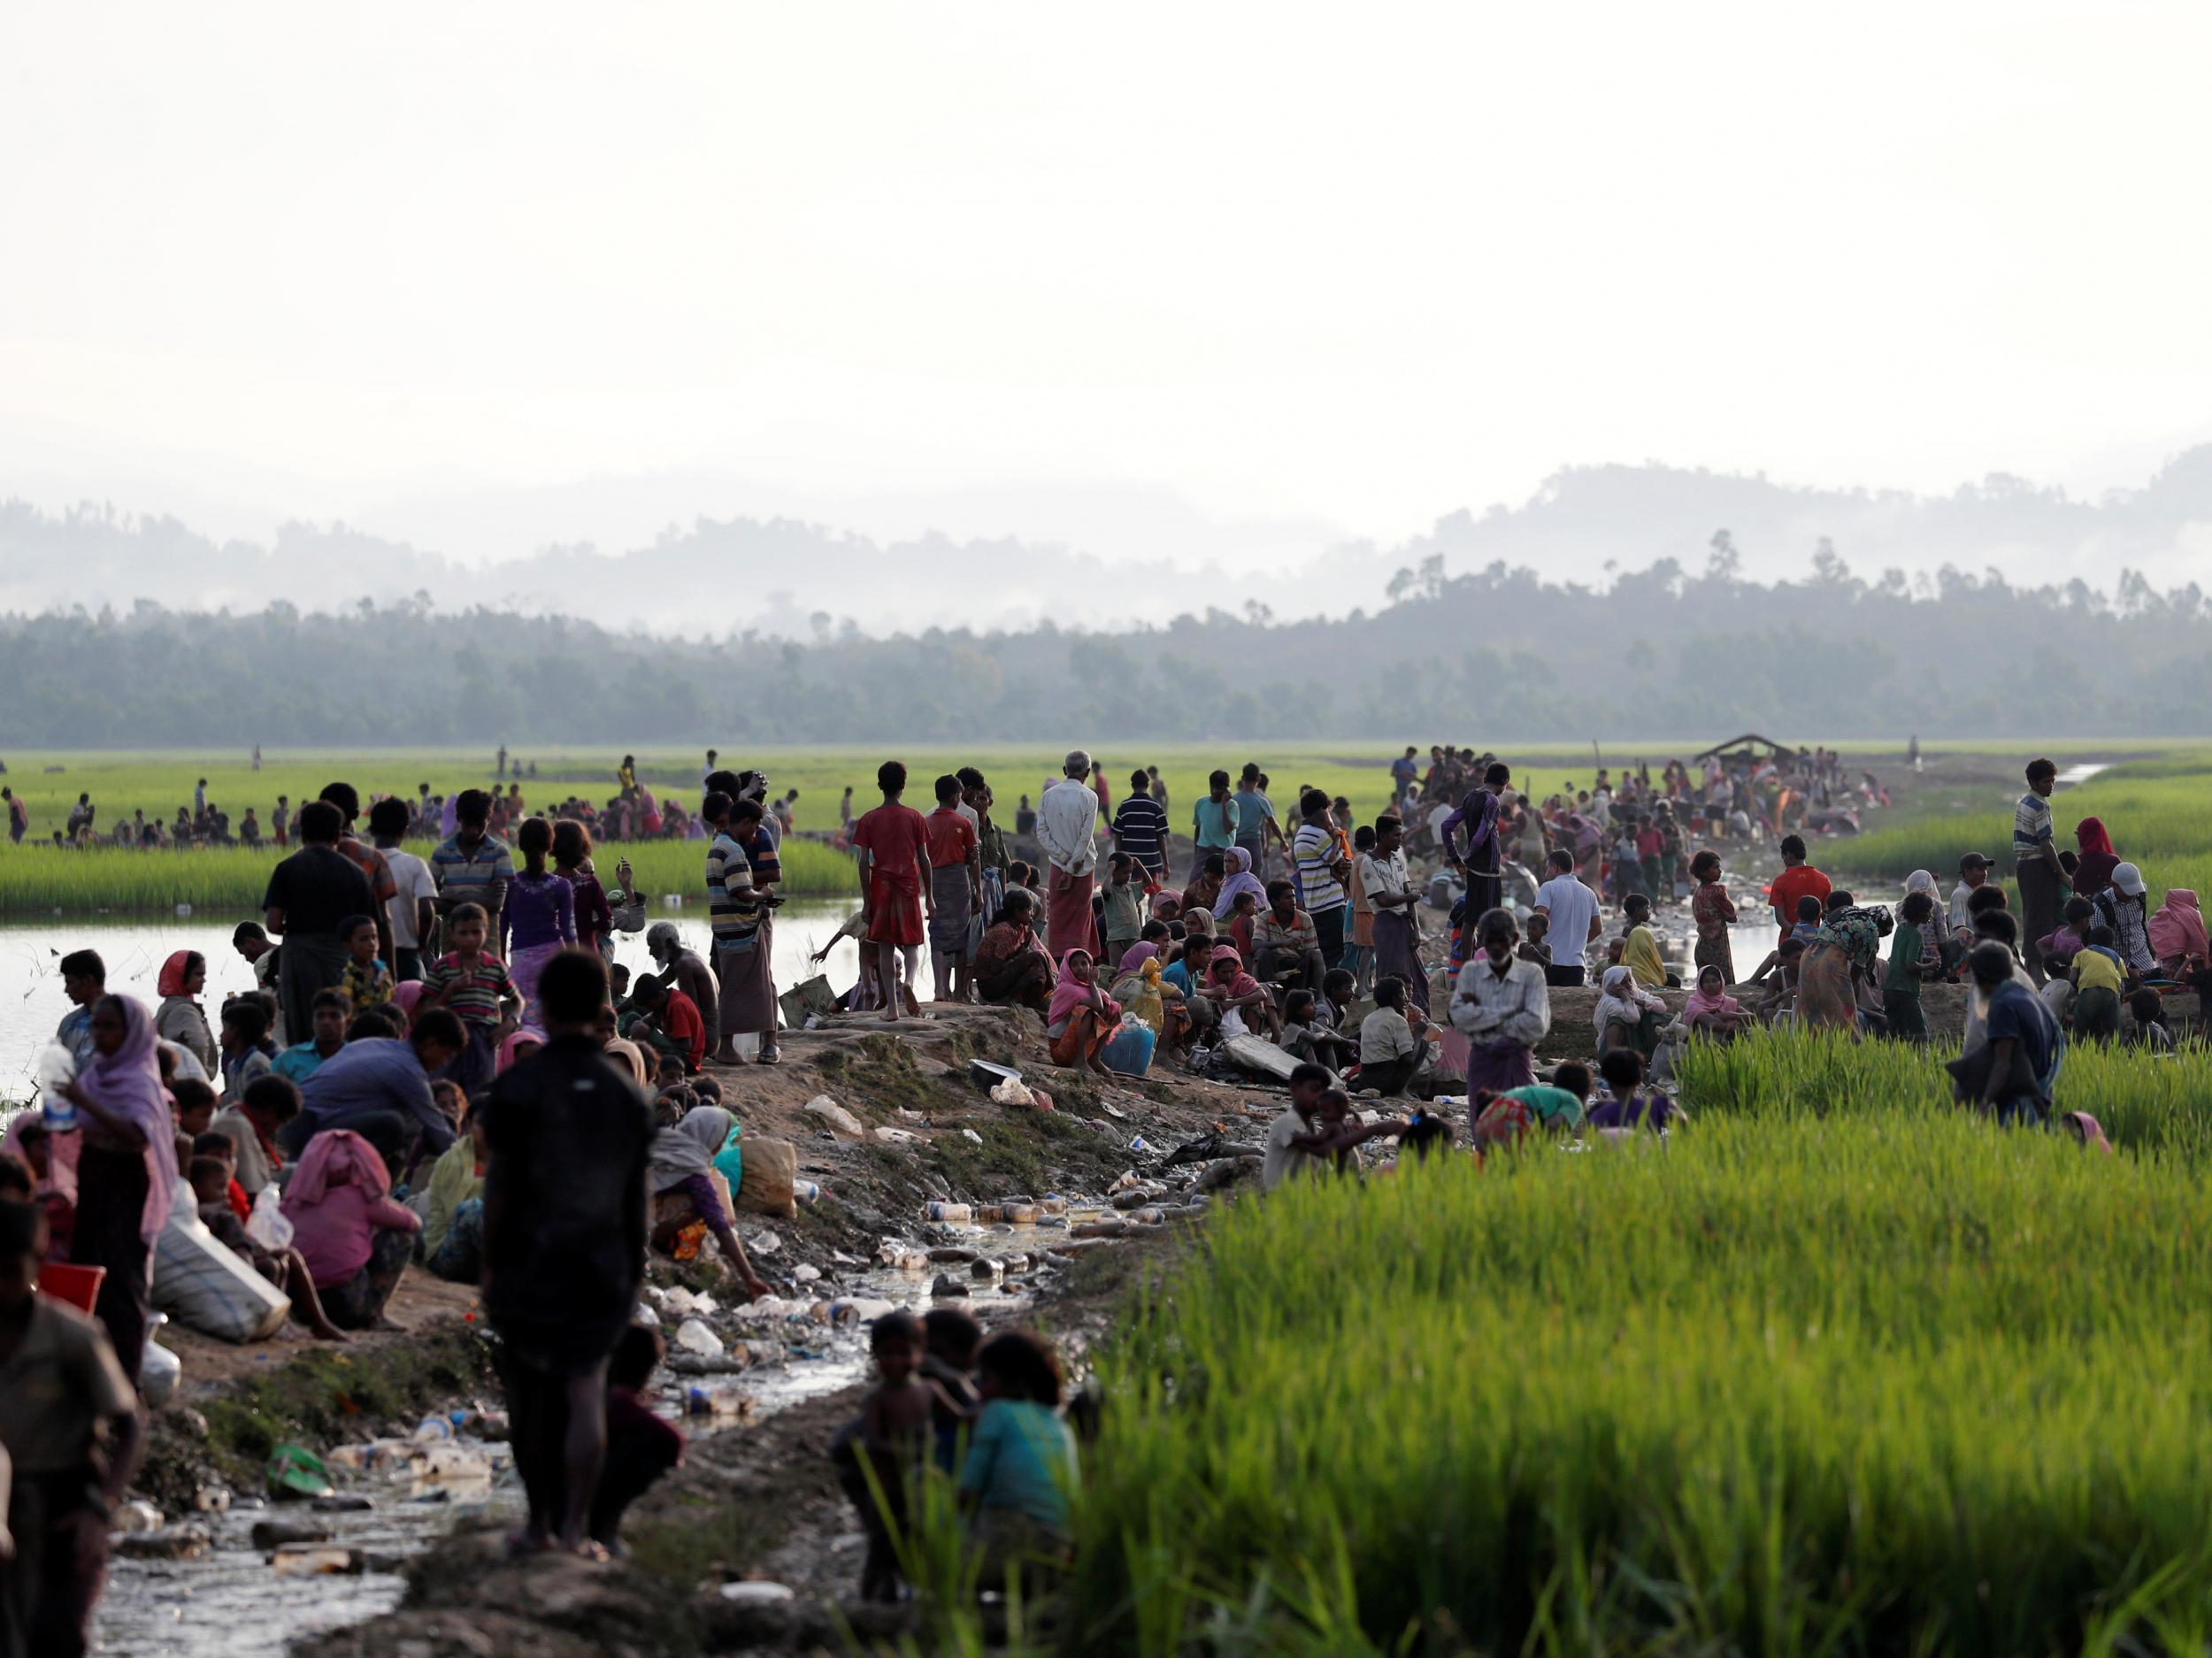 Rohingya refugees crossing the border into Bangladesh to escape persecution at home